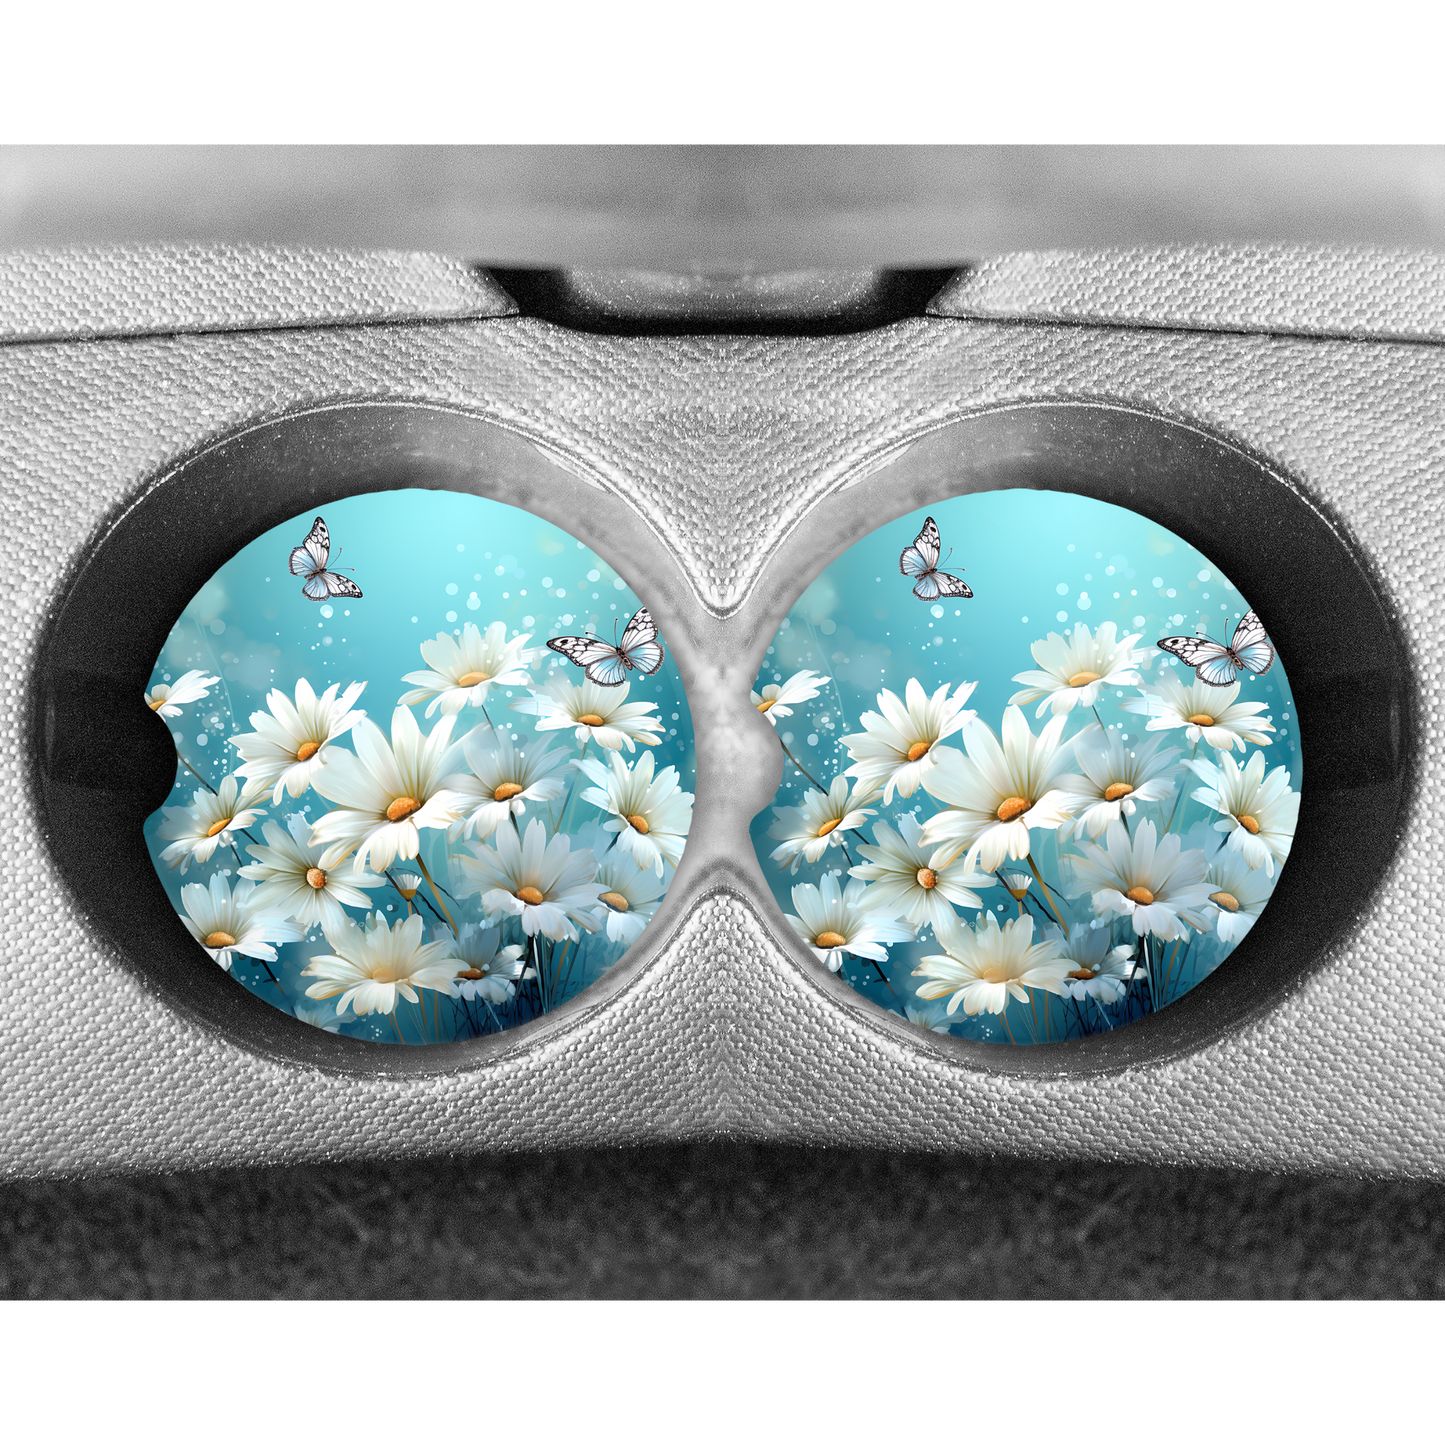 Premium Neoprene Car Coasters | Drink Holders for Your Car Console - Set of 2 Delicate DaisyDesign